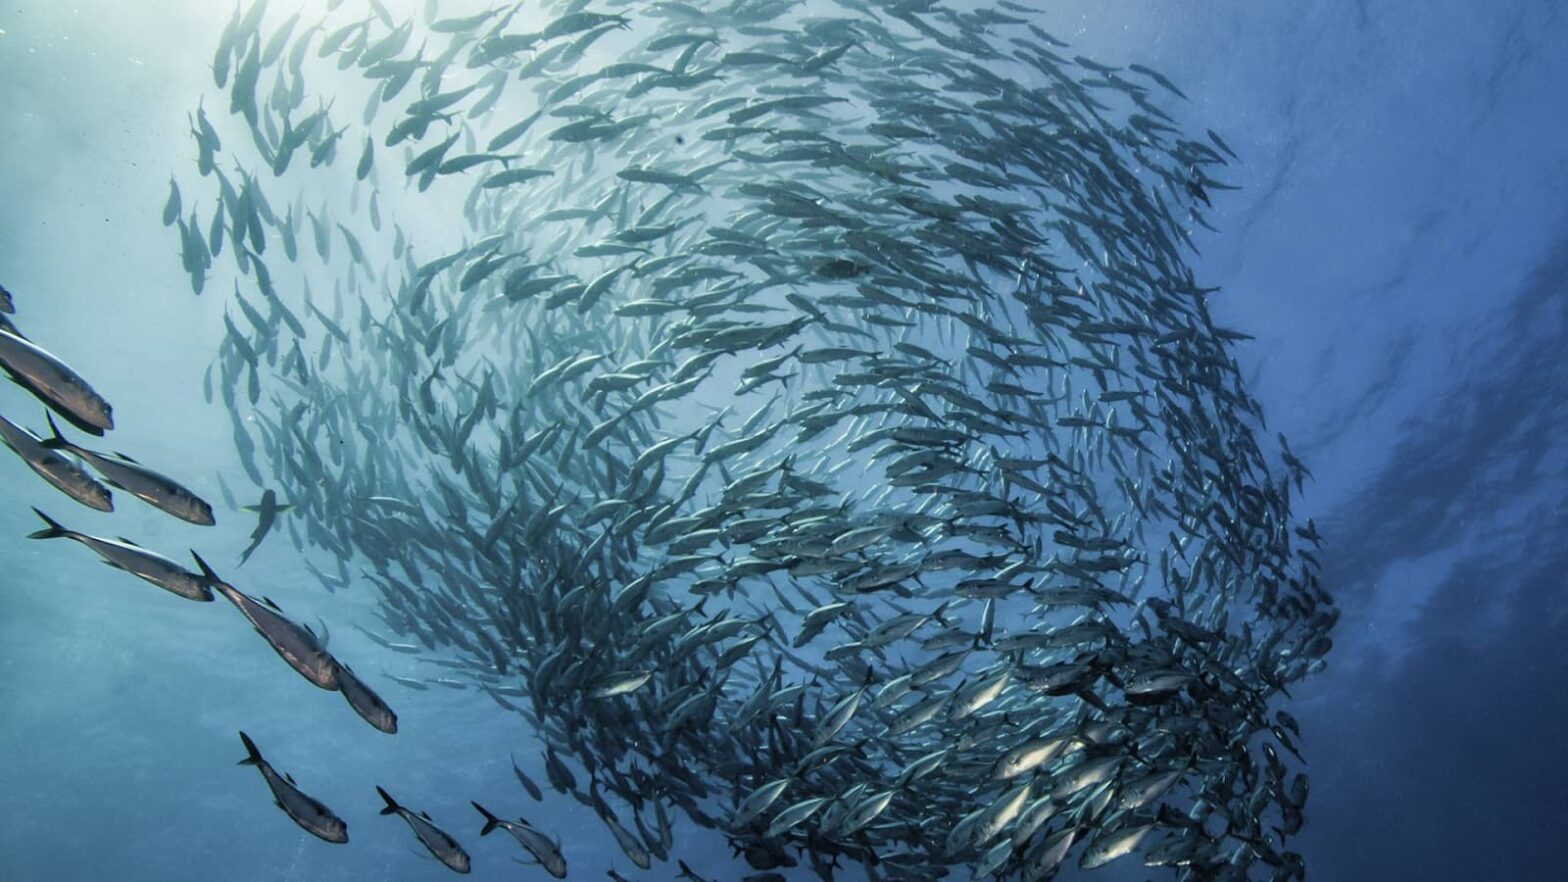 A school of fish swimming in the water